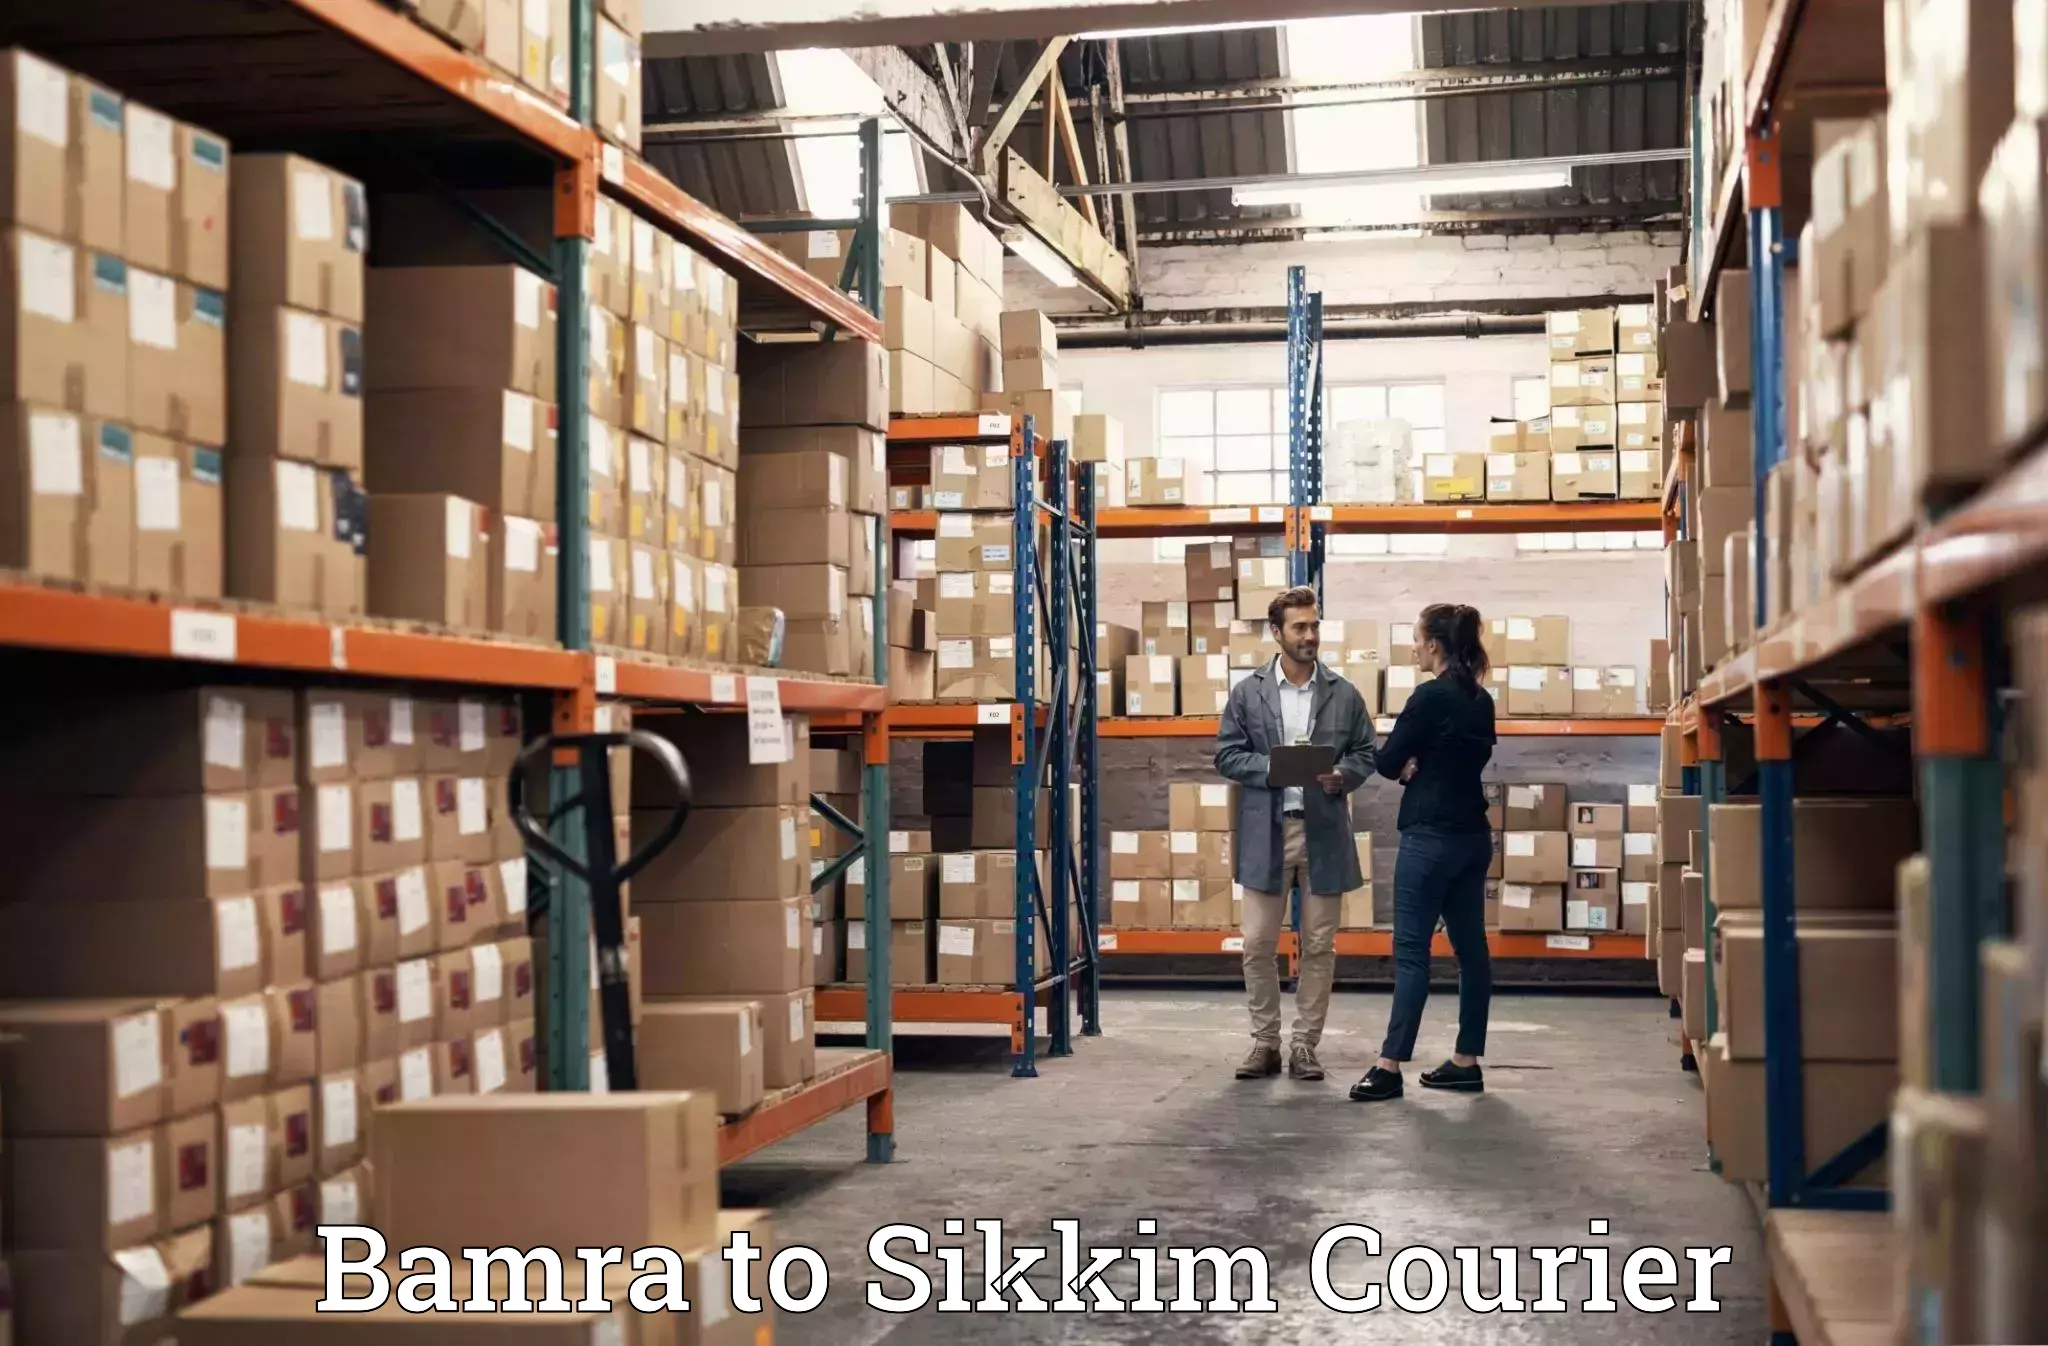 Trusted relocation experts Bamra to Sikkim